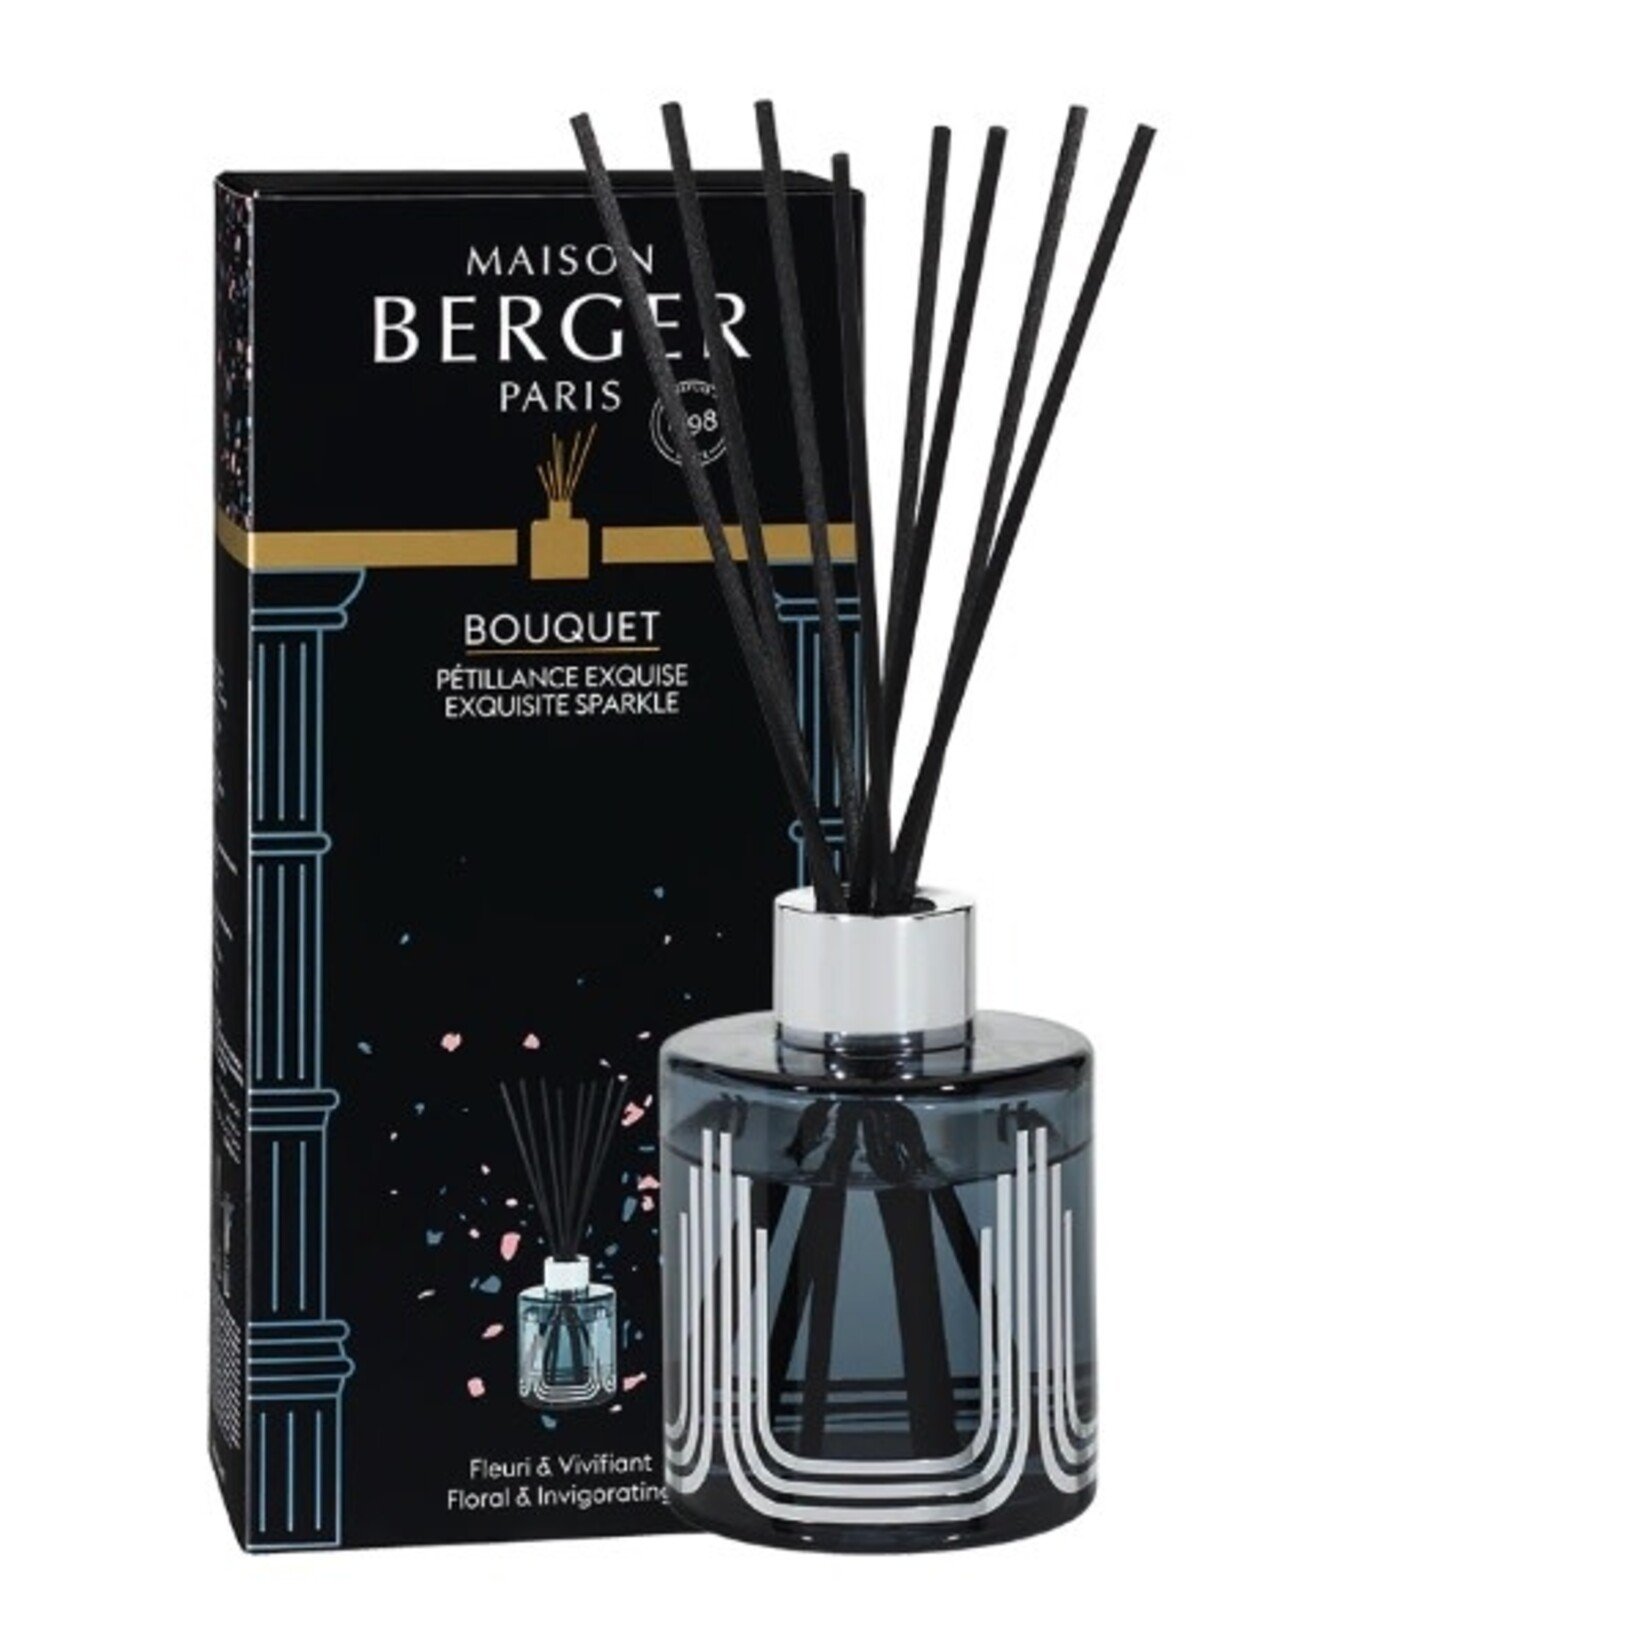 Maison Berger Paris Reed Diffuser Olympe Gray with Exquisite Sparkle